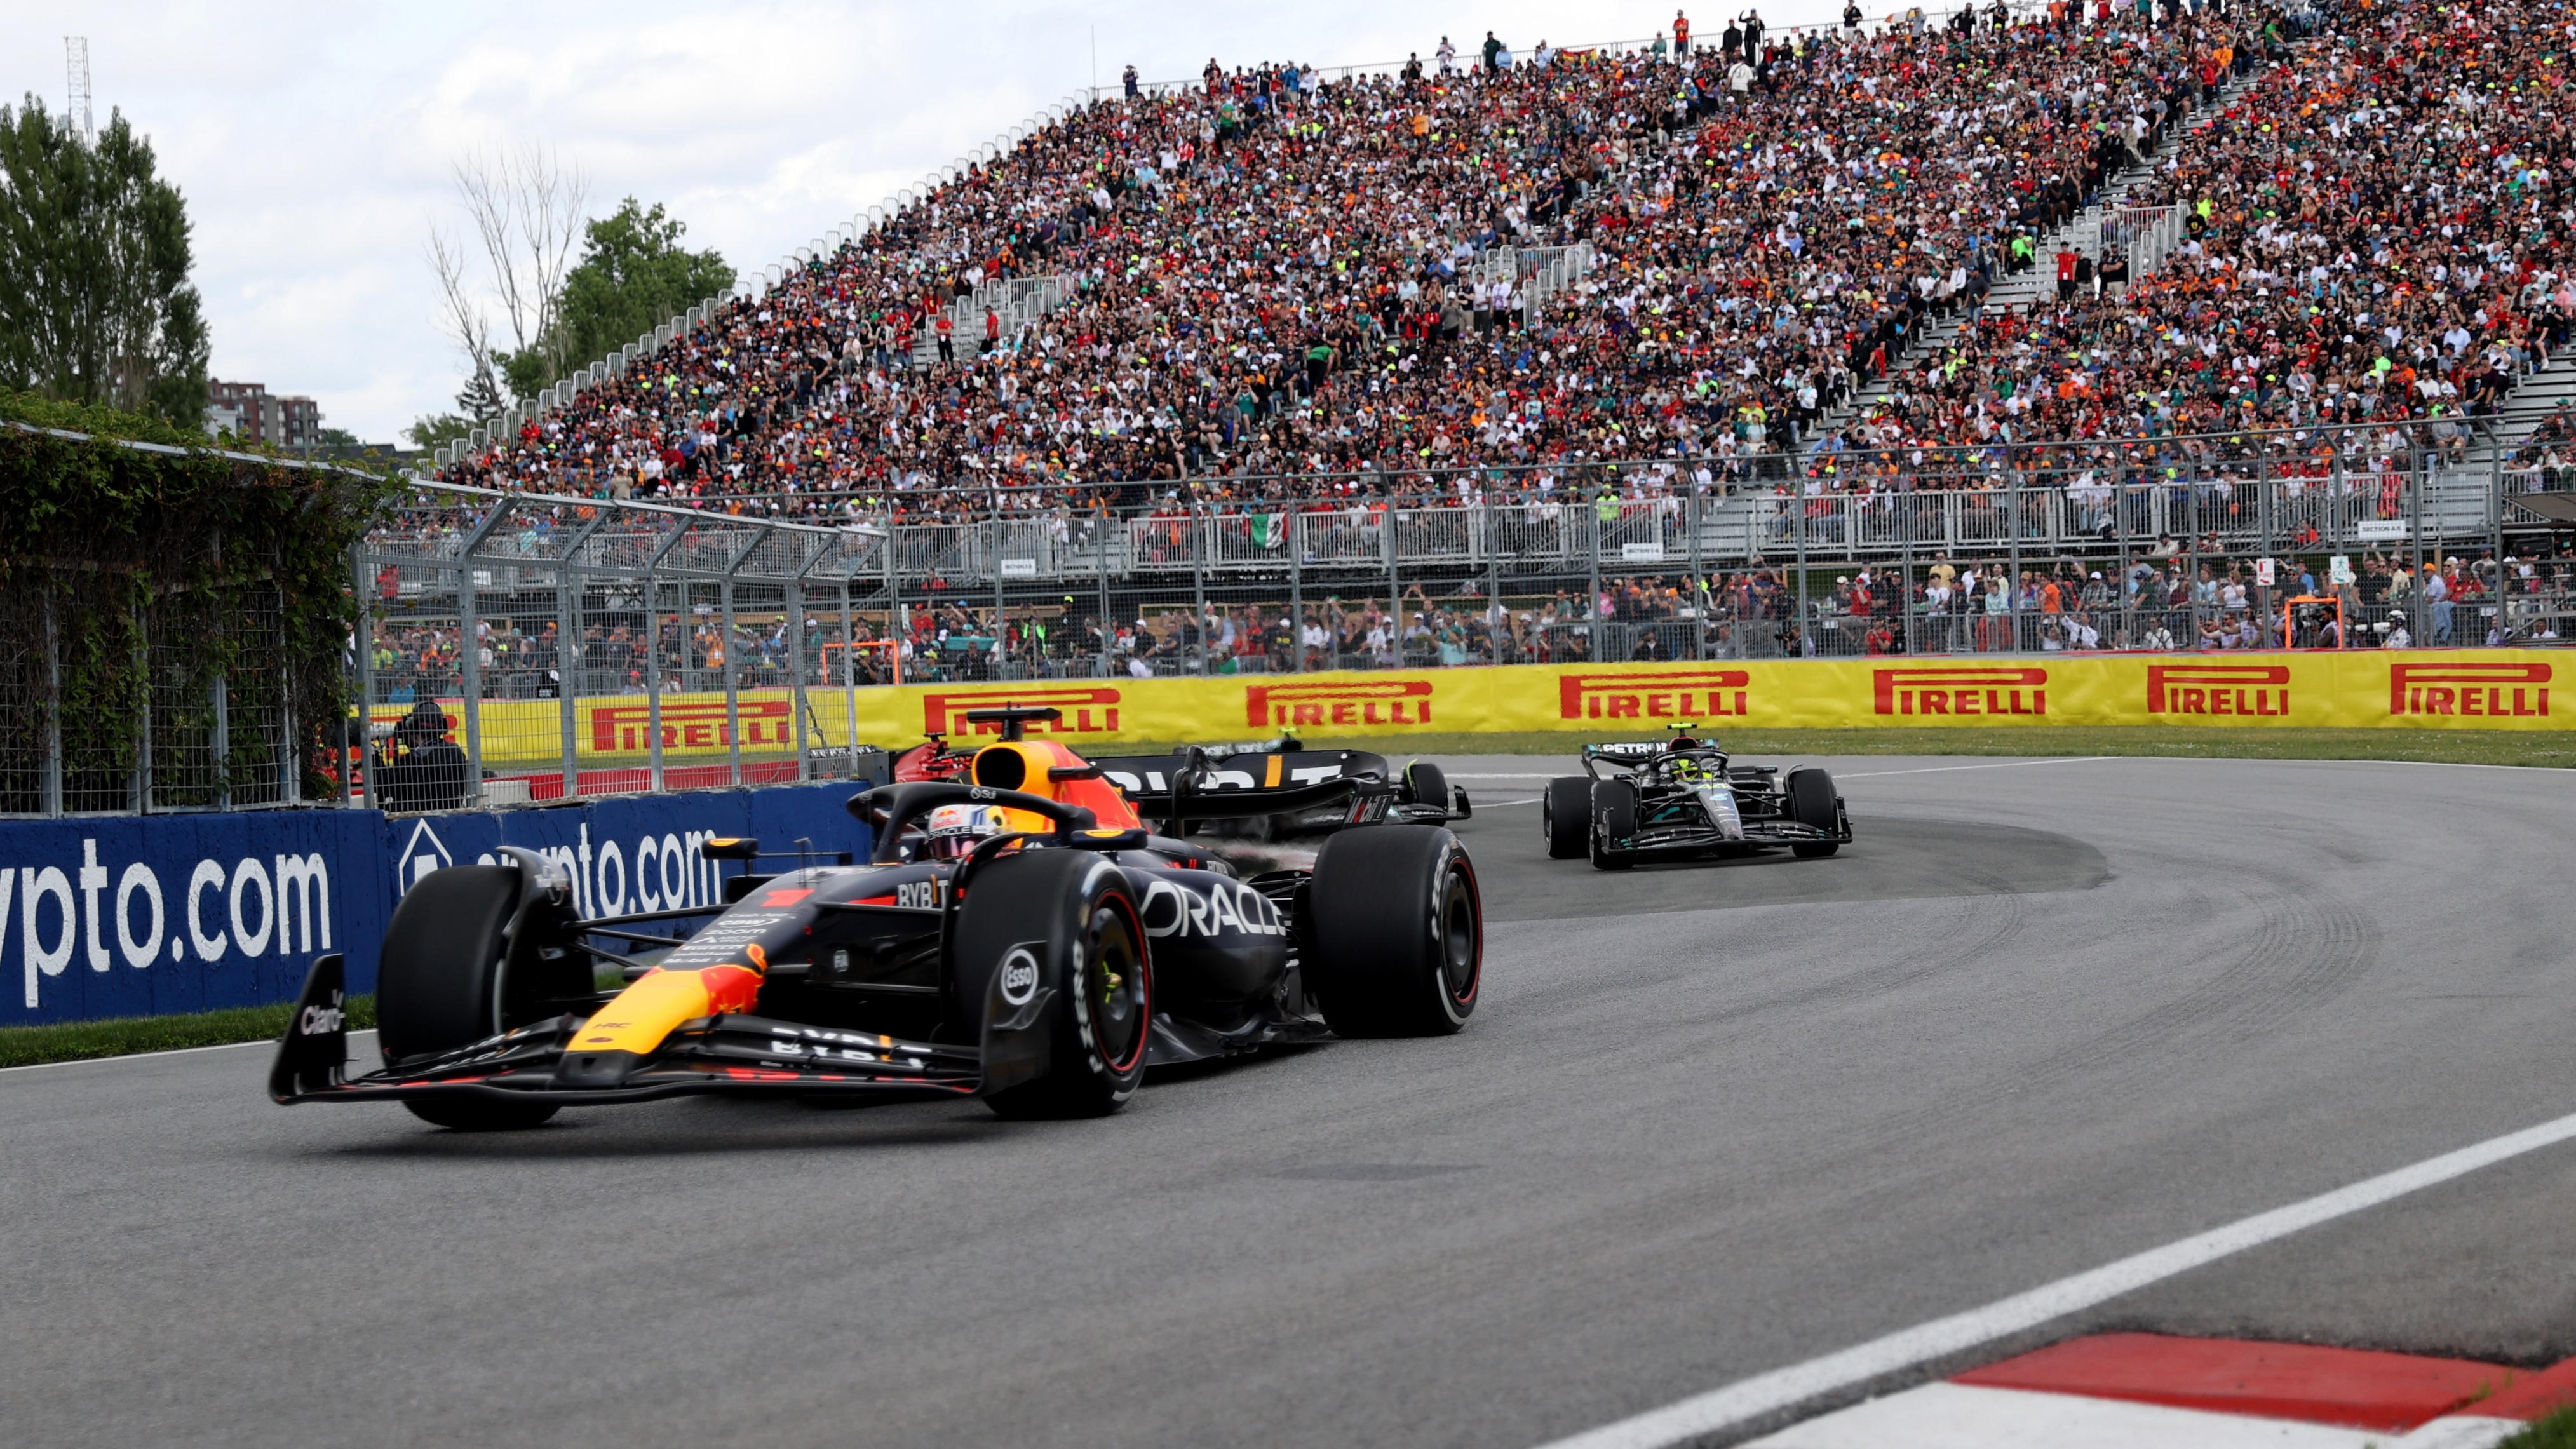 Austrian Grand Prix live stream how to watch F1 online from anywhere Race Day TechRadar